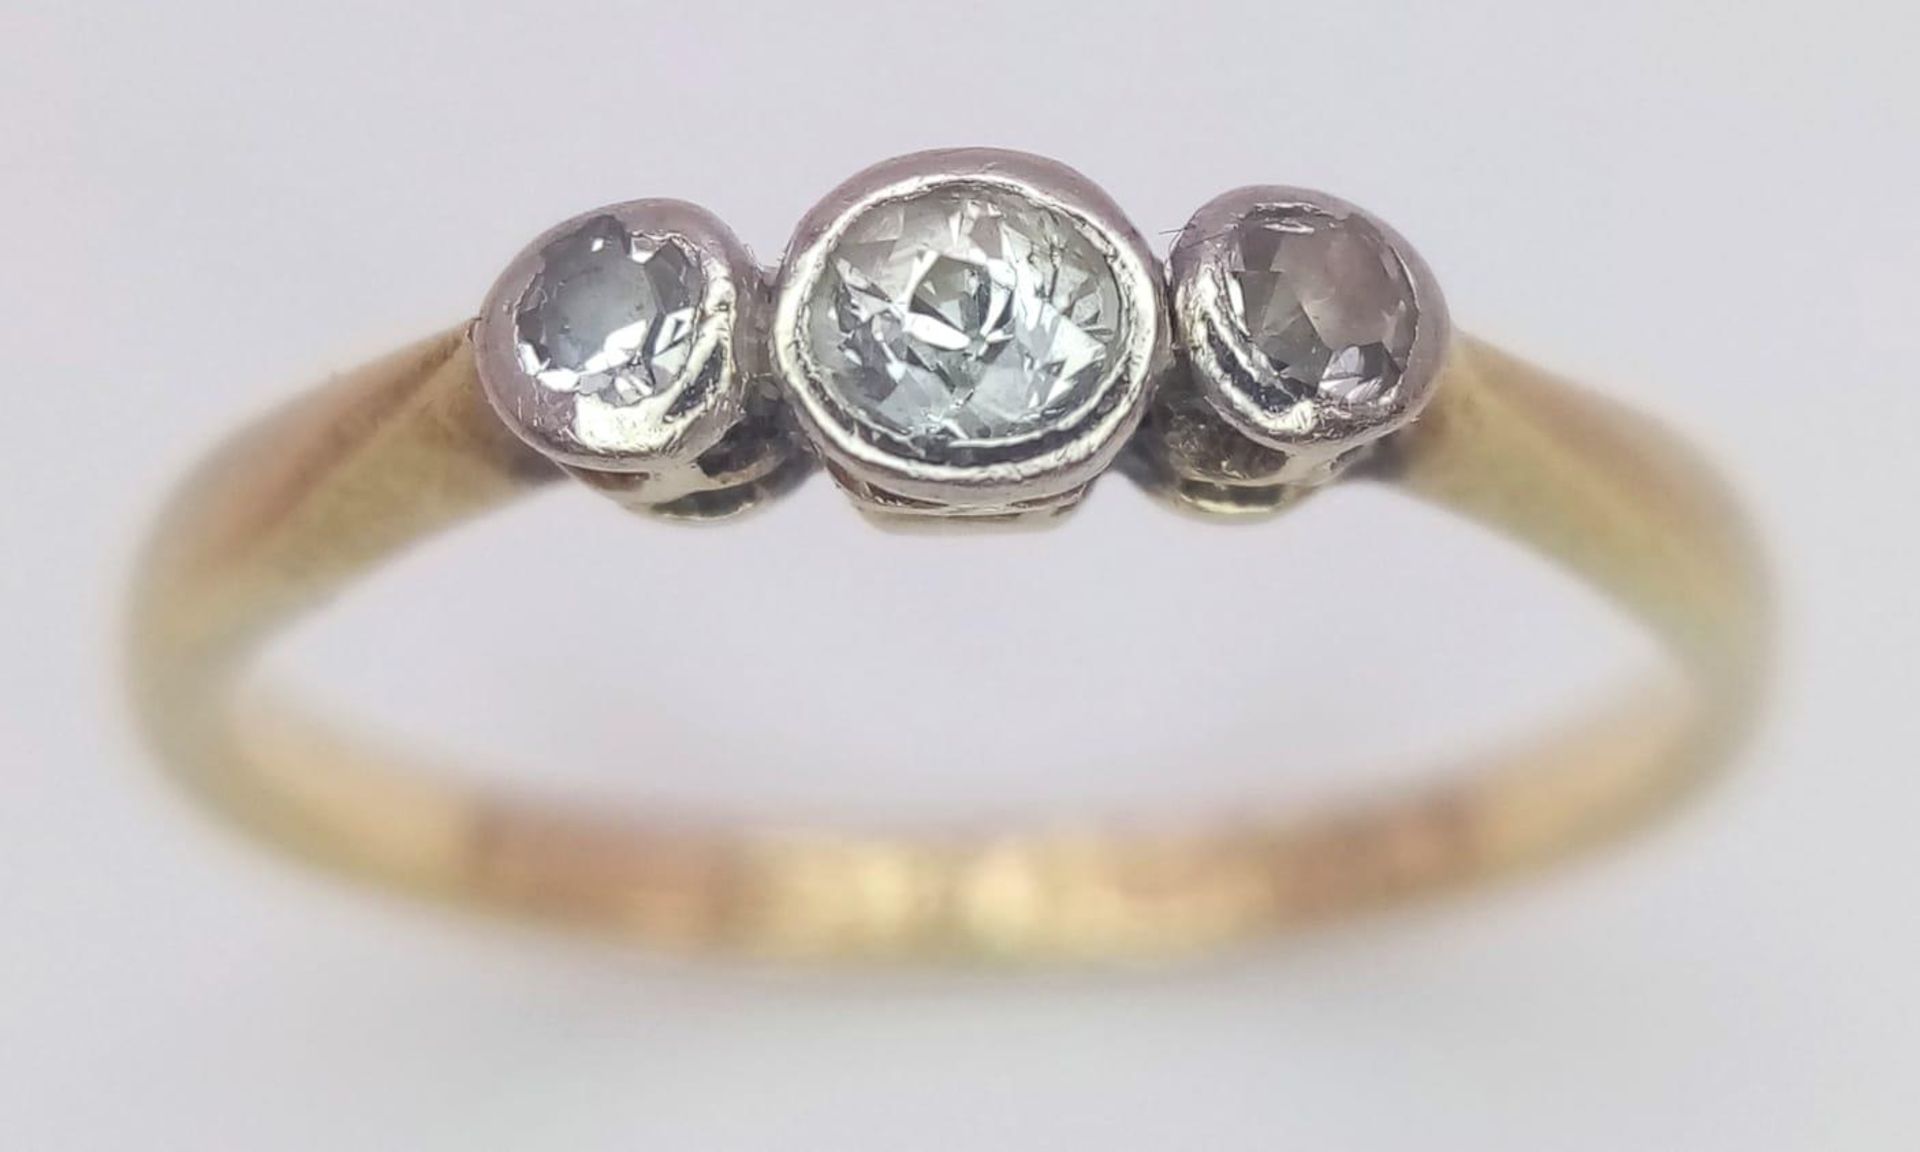 An antique 18 K yellow gold ring with a trilogy of old cut diamonds. Size: M, weight: 1.9 g. - Image 2 of 4